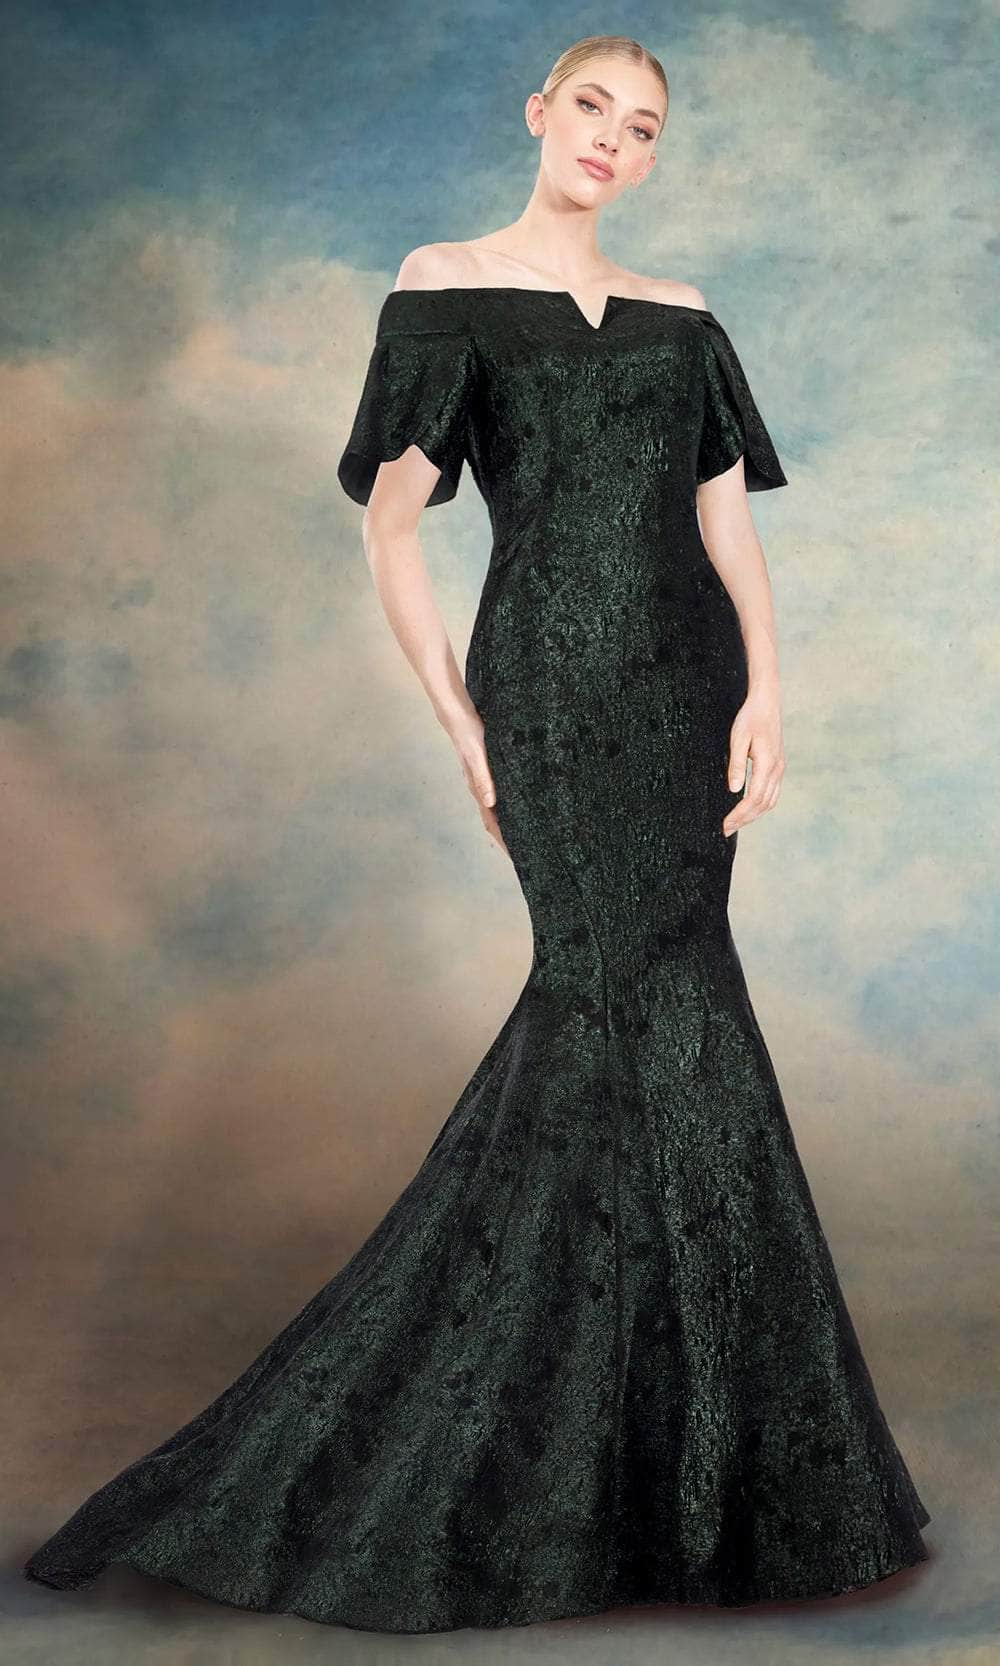 Image of Janique 4941 - Tulip Sleeve Mermaid Gown